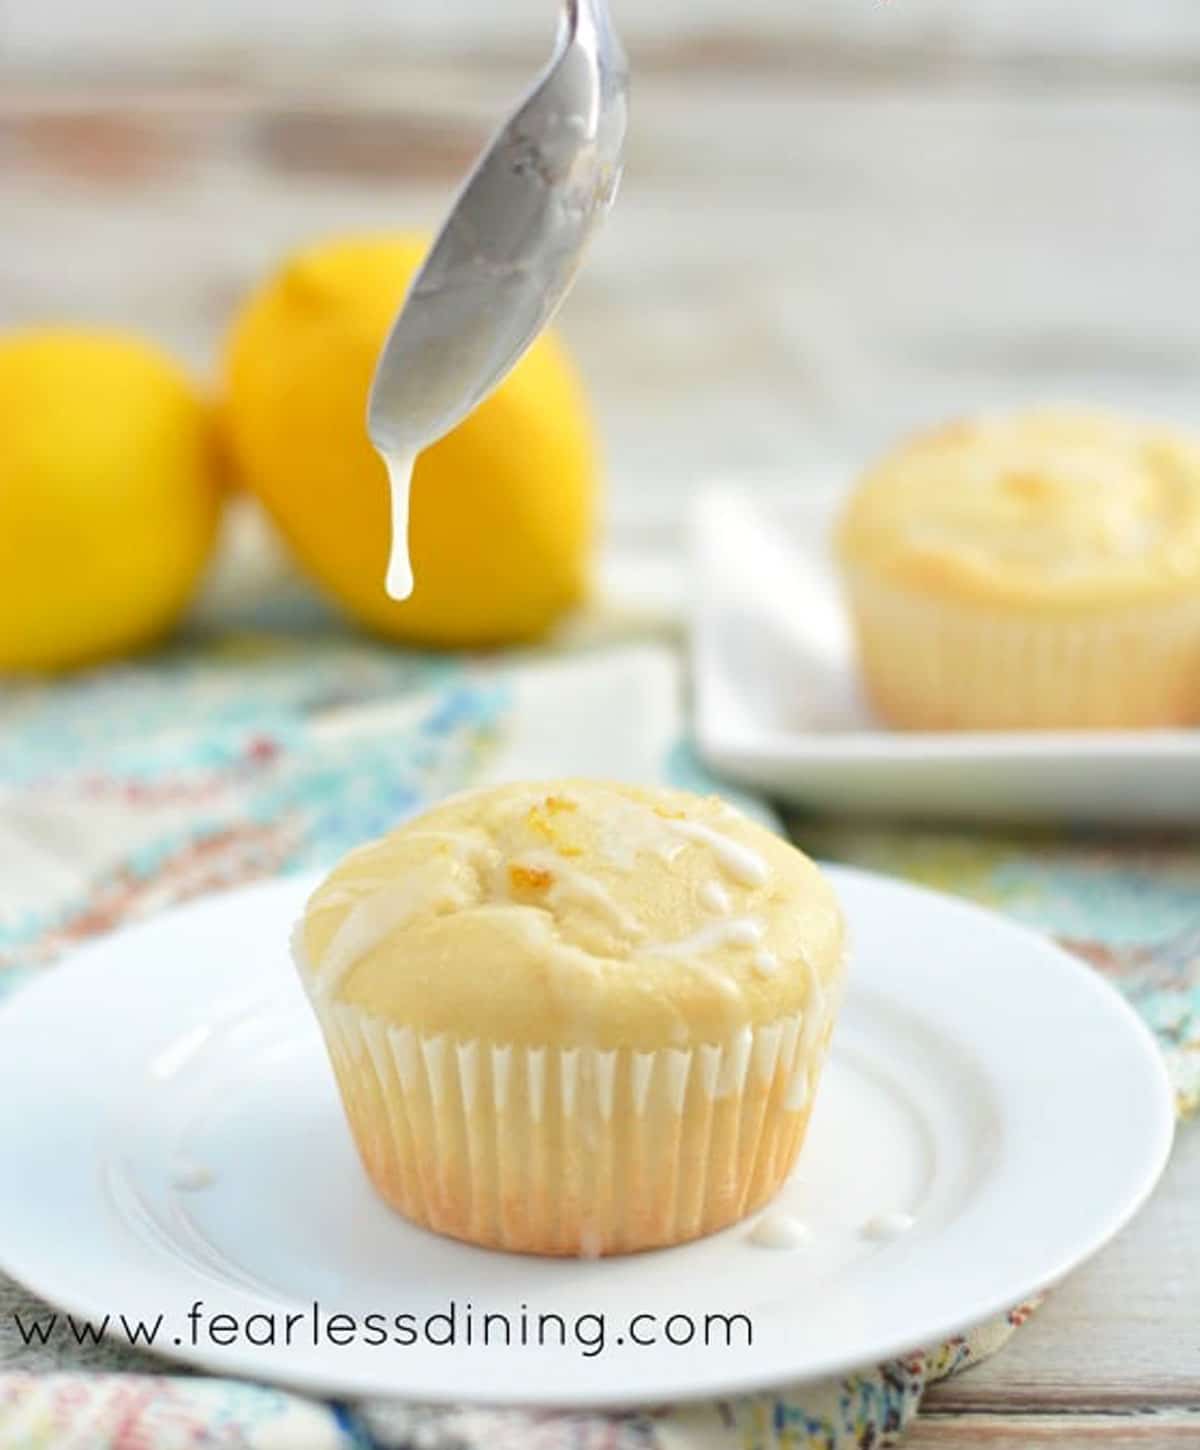 A spoon drizzling icing over a cupcake.